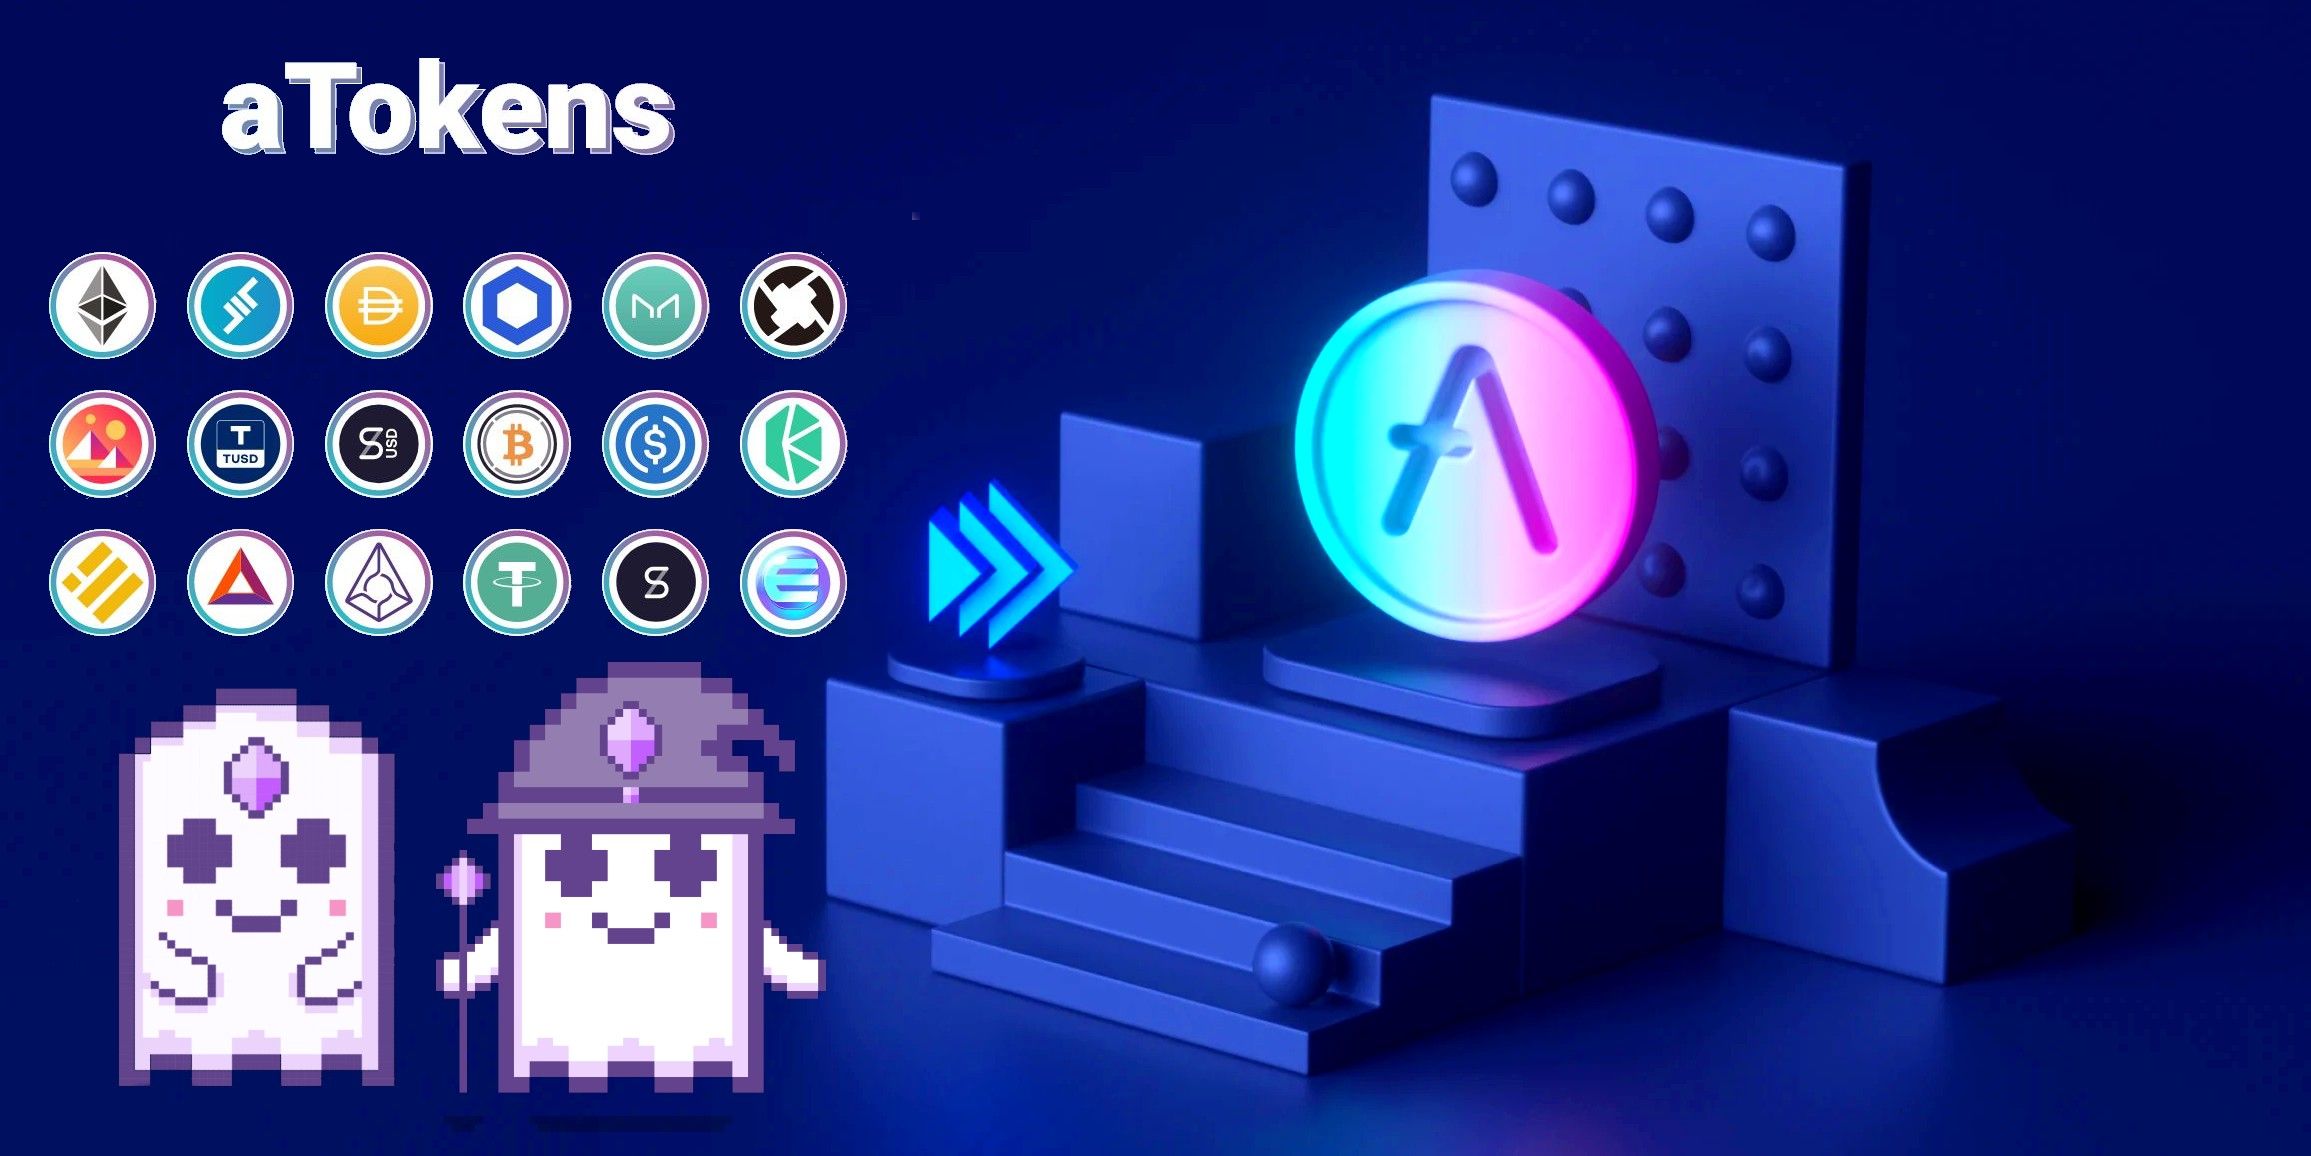 Abstract art, Aave logo on pedestal with stairs and 3D metallic geometric shapes, dark blue background, Aave aTokens top left, two Aavegotchi pets bottom left